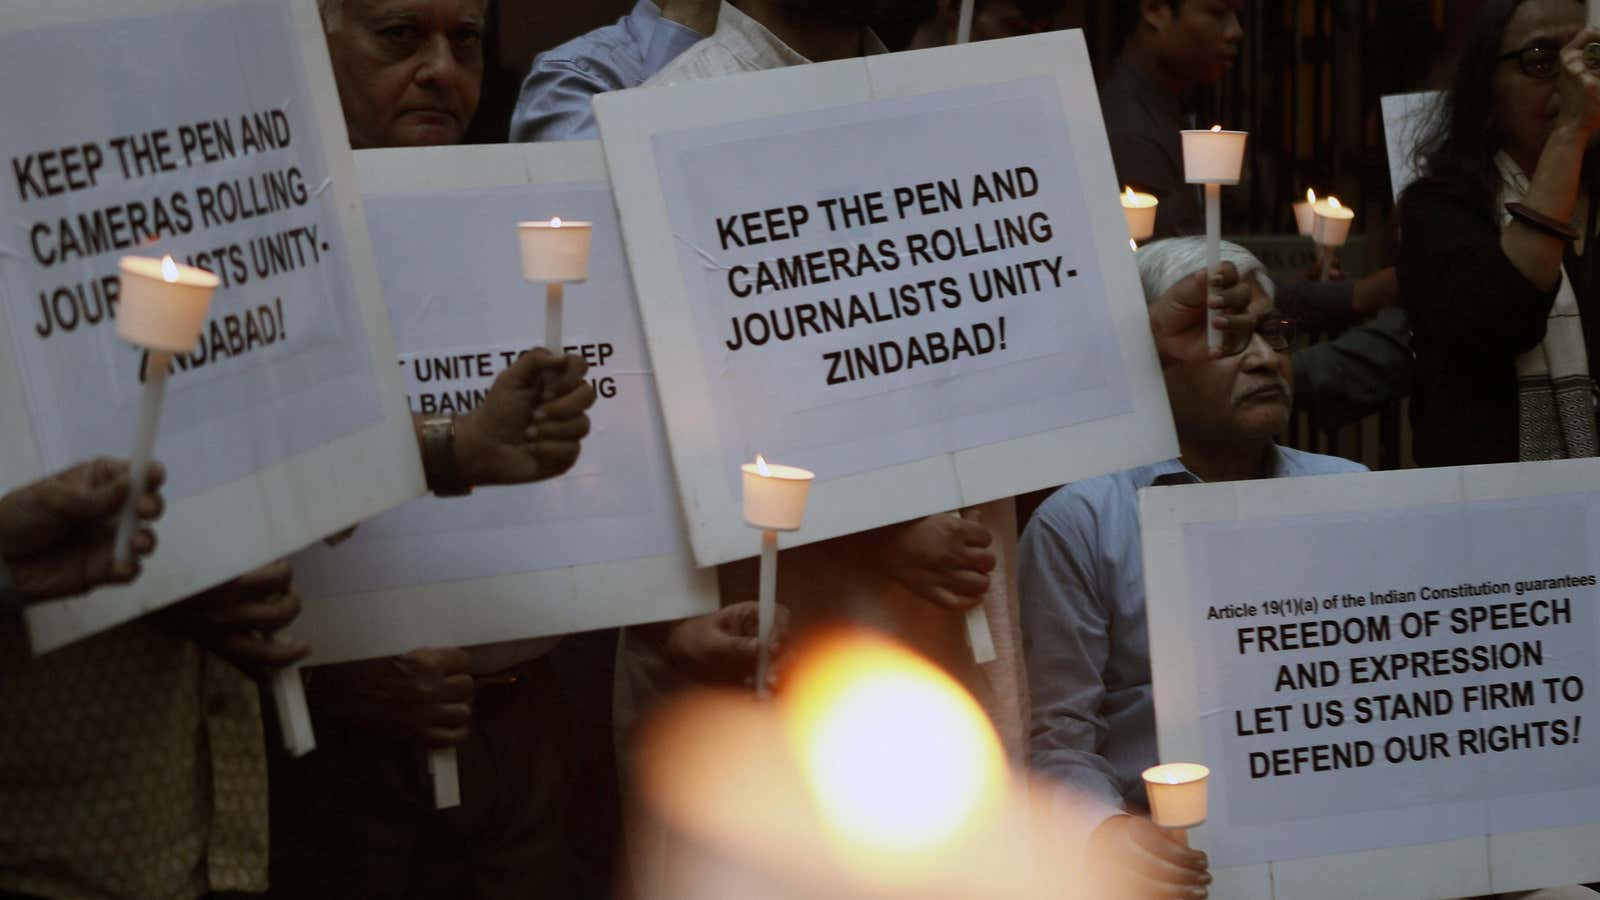 India's top court has said the state is using national security as ruse to deny free speech